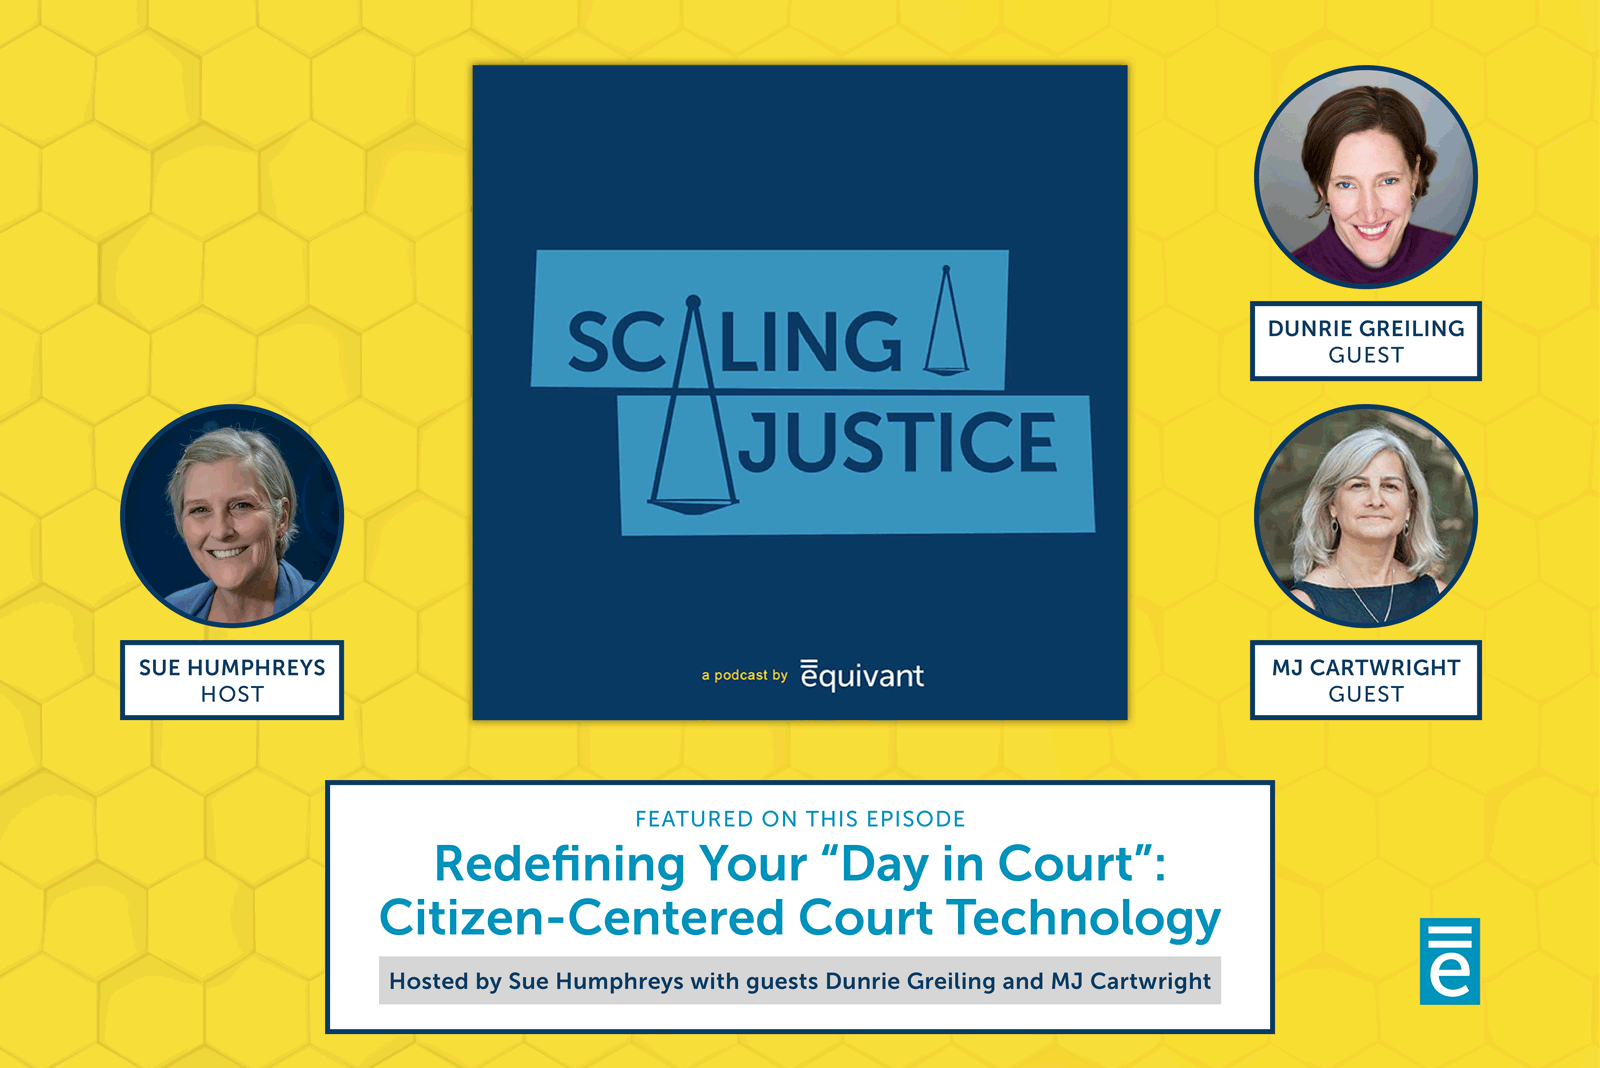 Redefining Your “Day in Court”: Citizen-Centered Court Technology